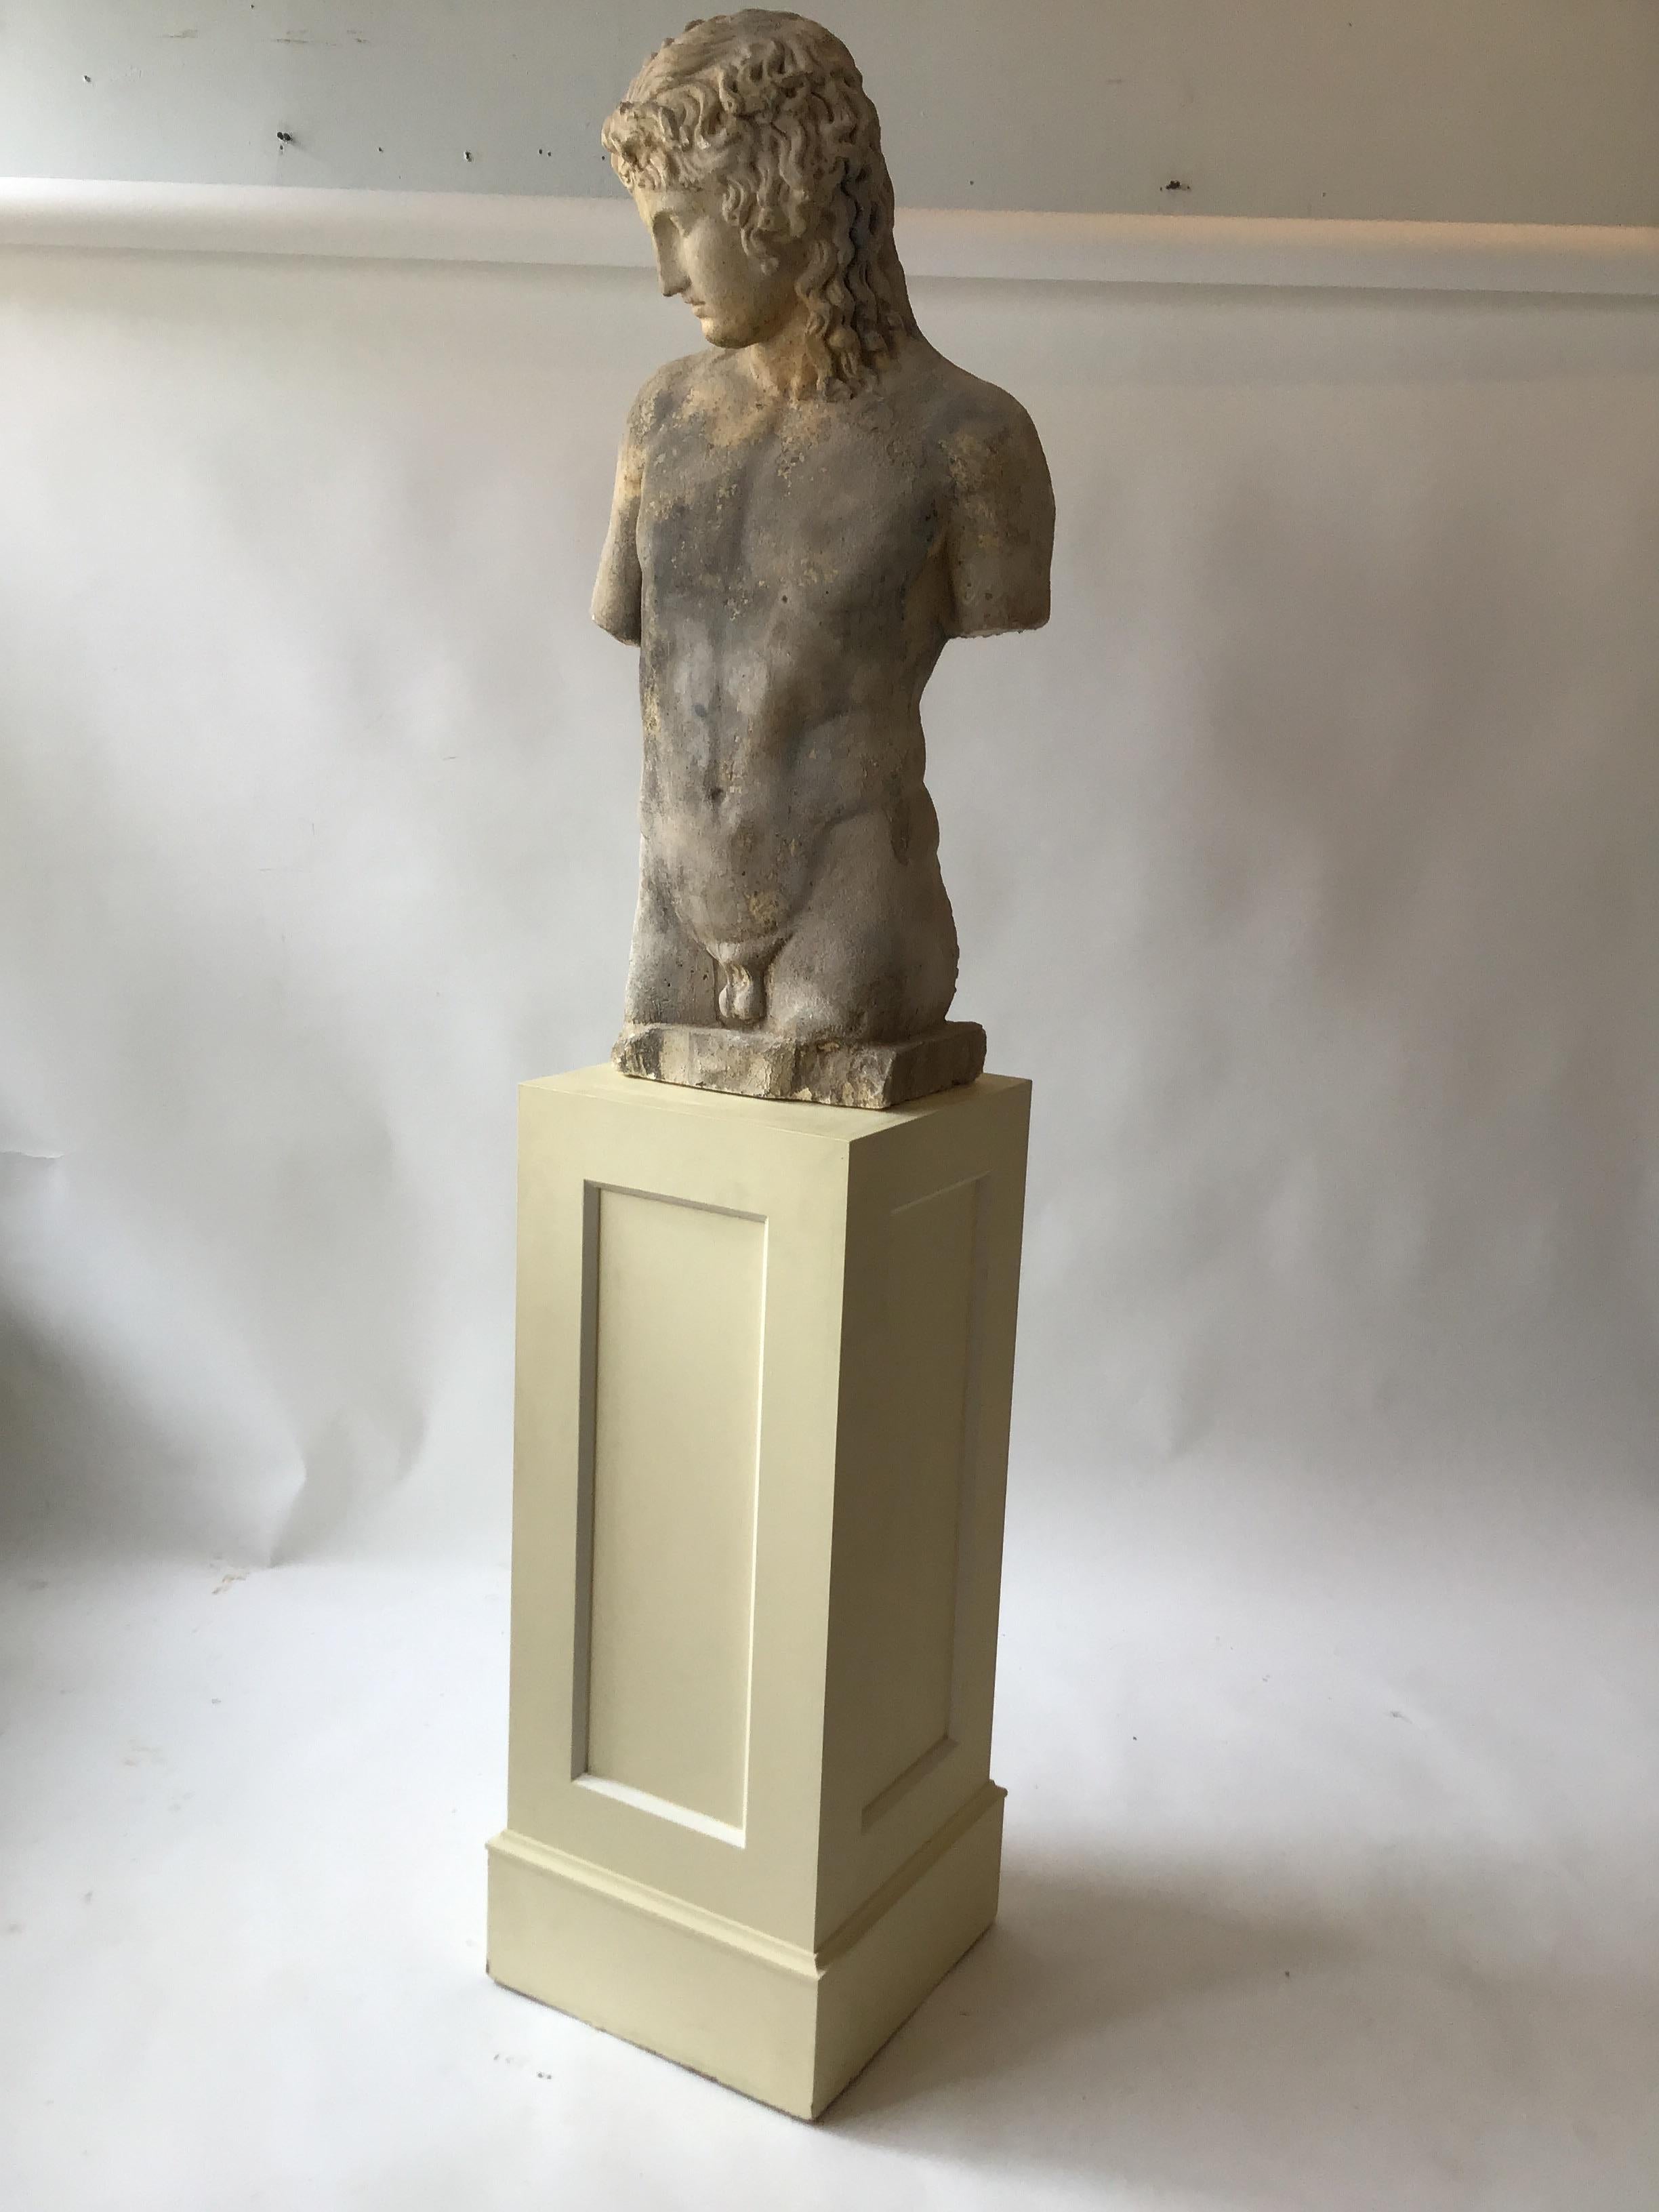 Cement figure of a Roman male on a wood pedestal. From a celebrities Southampton, NY oceanfront estate.